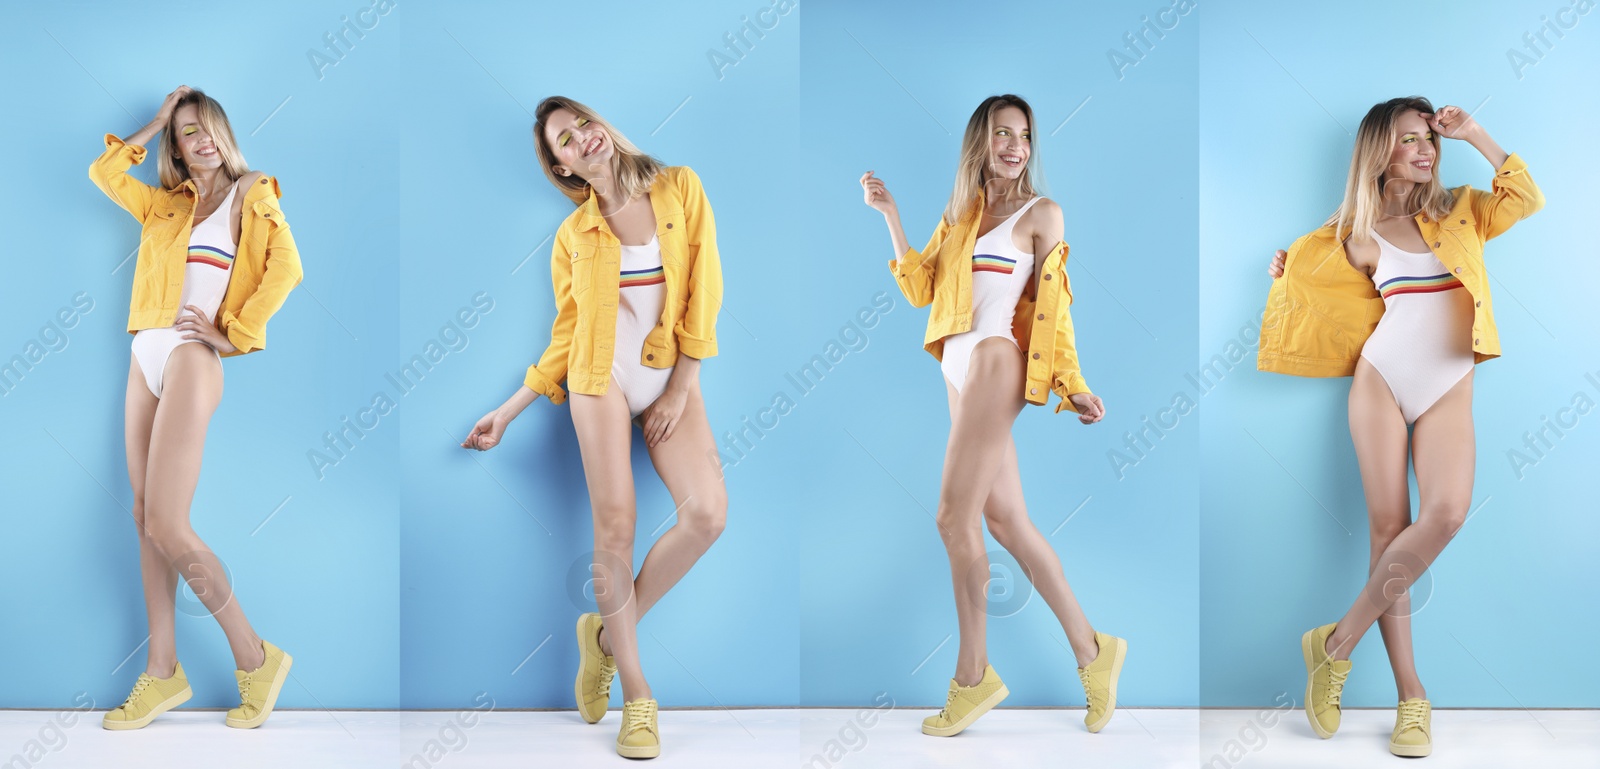 Image of Collage of beautiful young woman posing near color wall